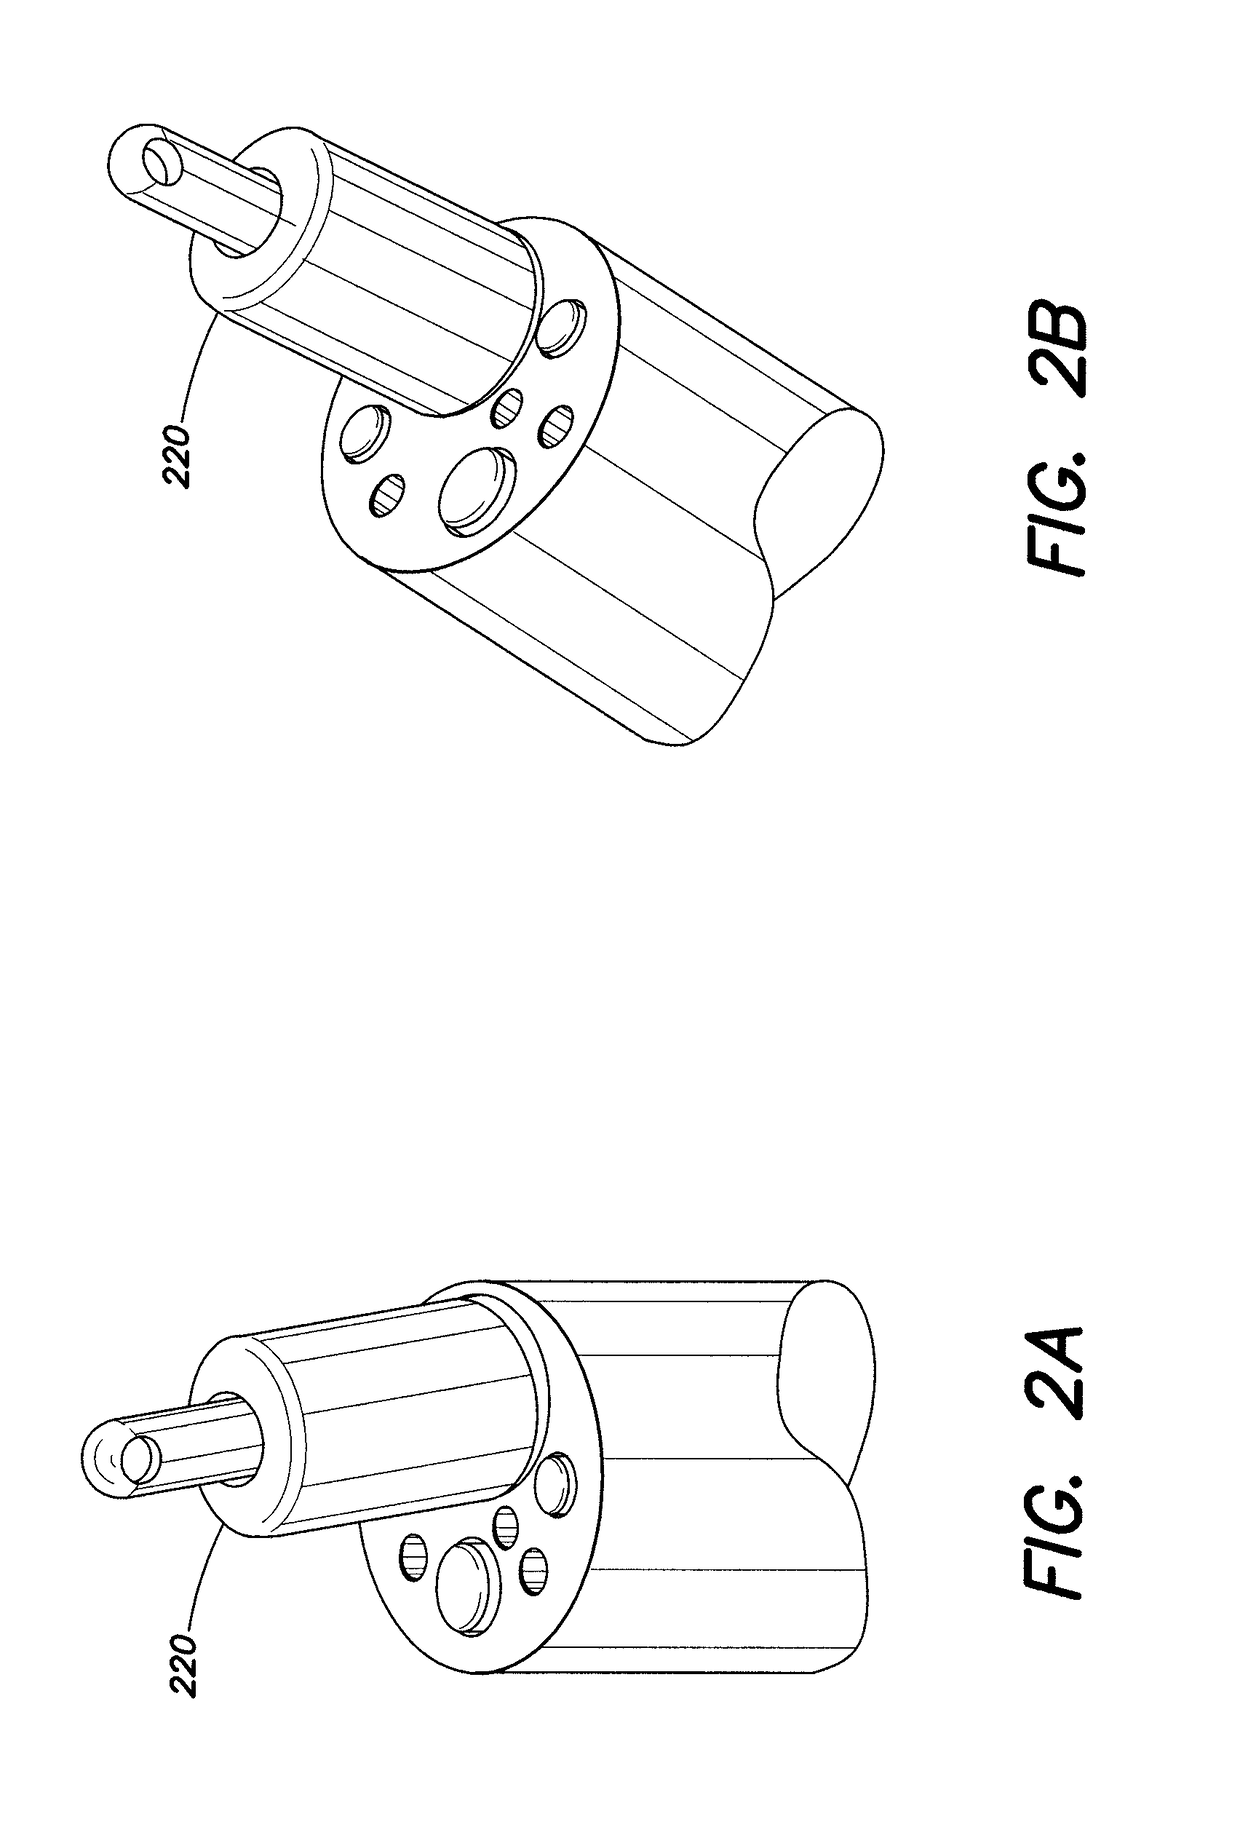 Endoscopic tool for debriding and removing polyps